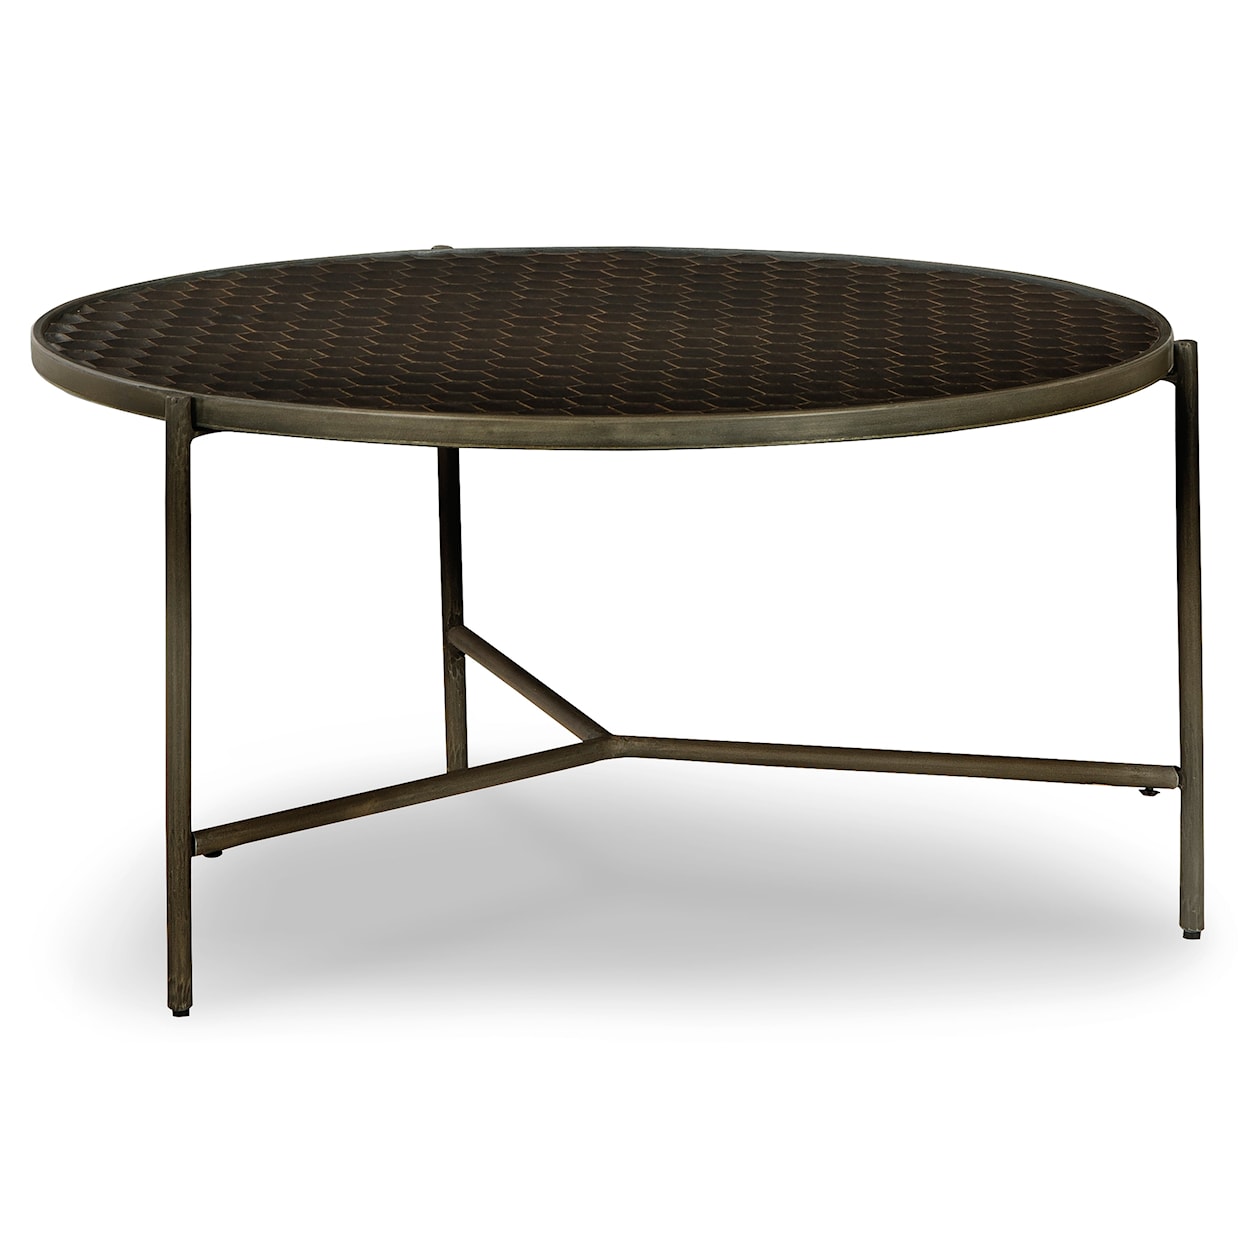 Signature Design by Ashley Furniture Doraley Coffee Table